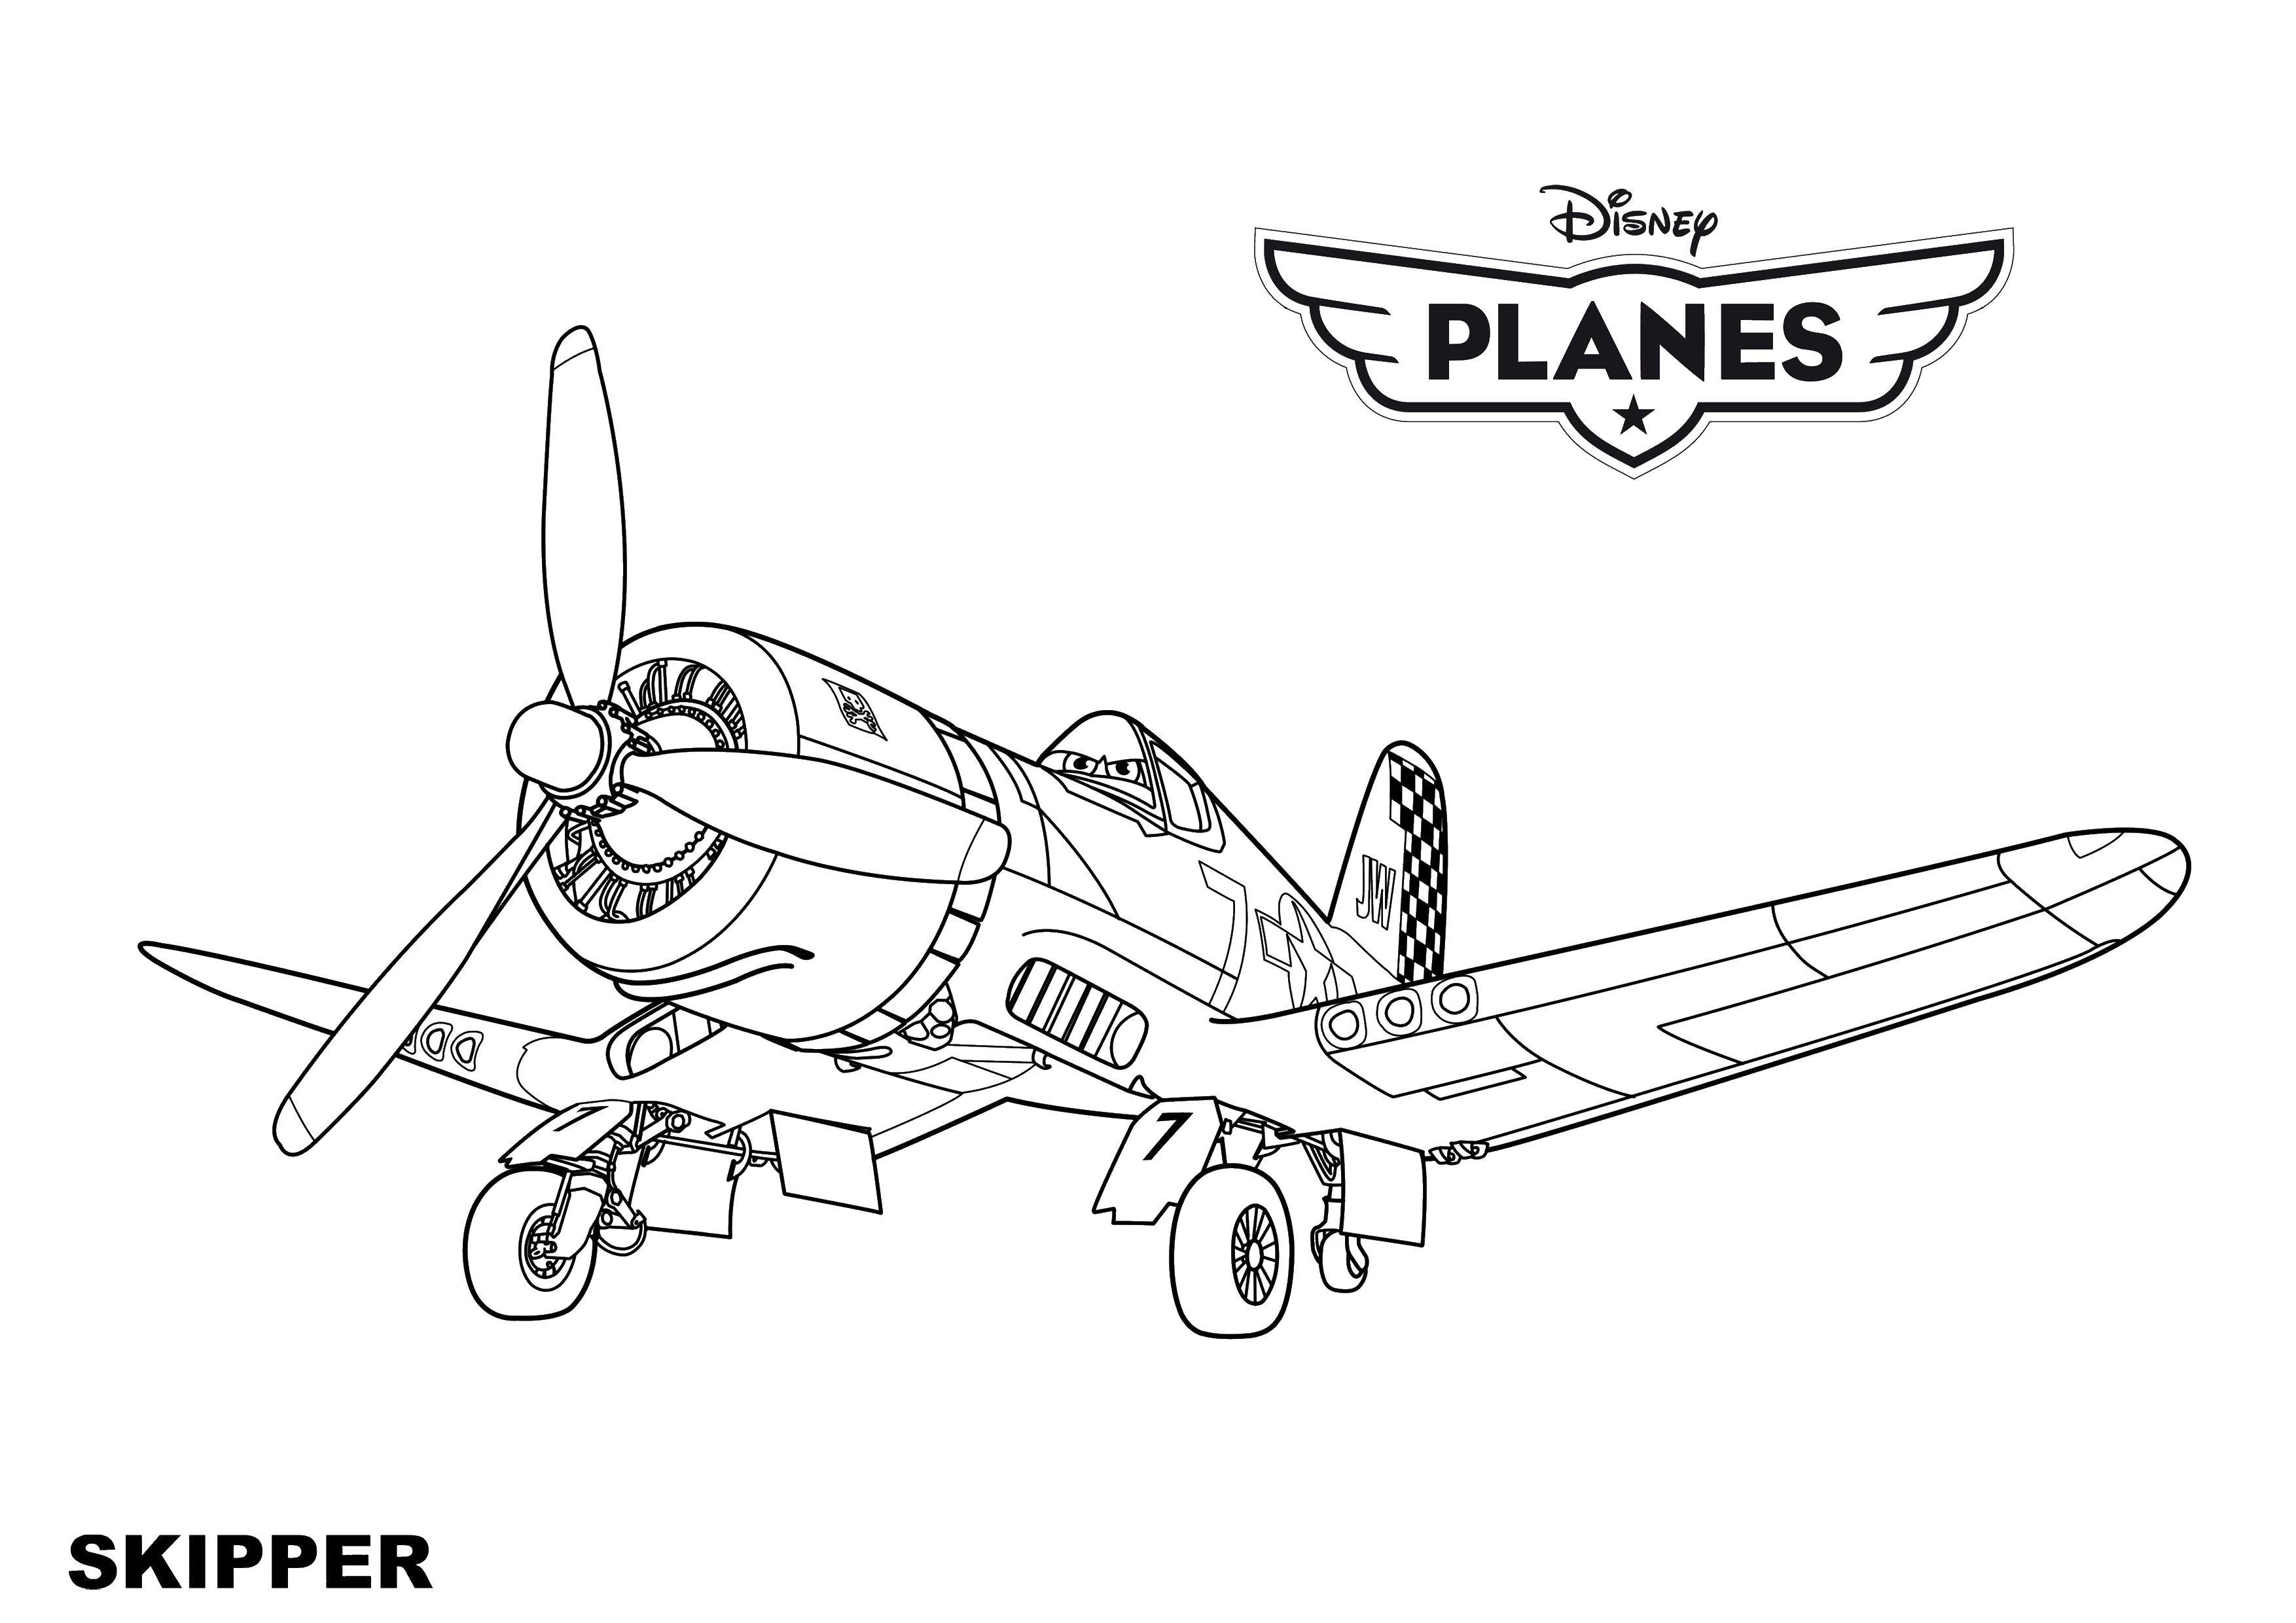 Coloring The plane is skipper. Category Disney cartoons. Tags:  The Plane, Dusty.